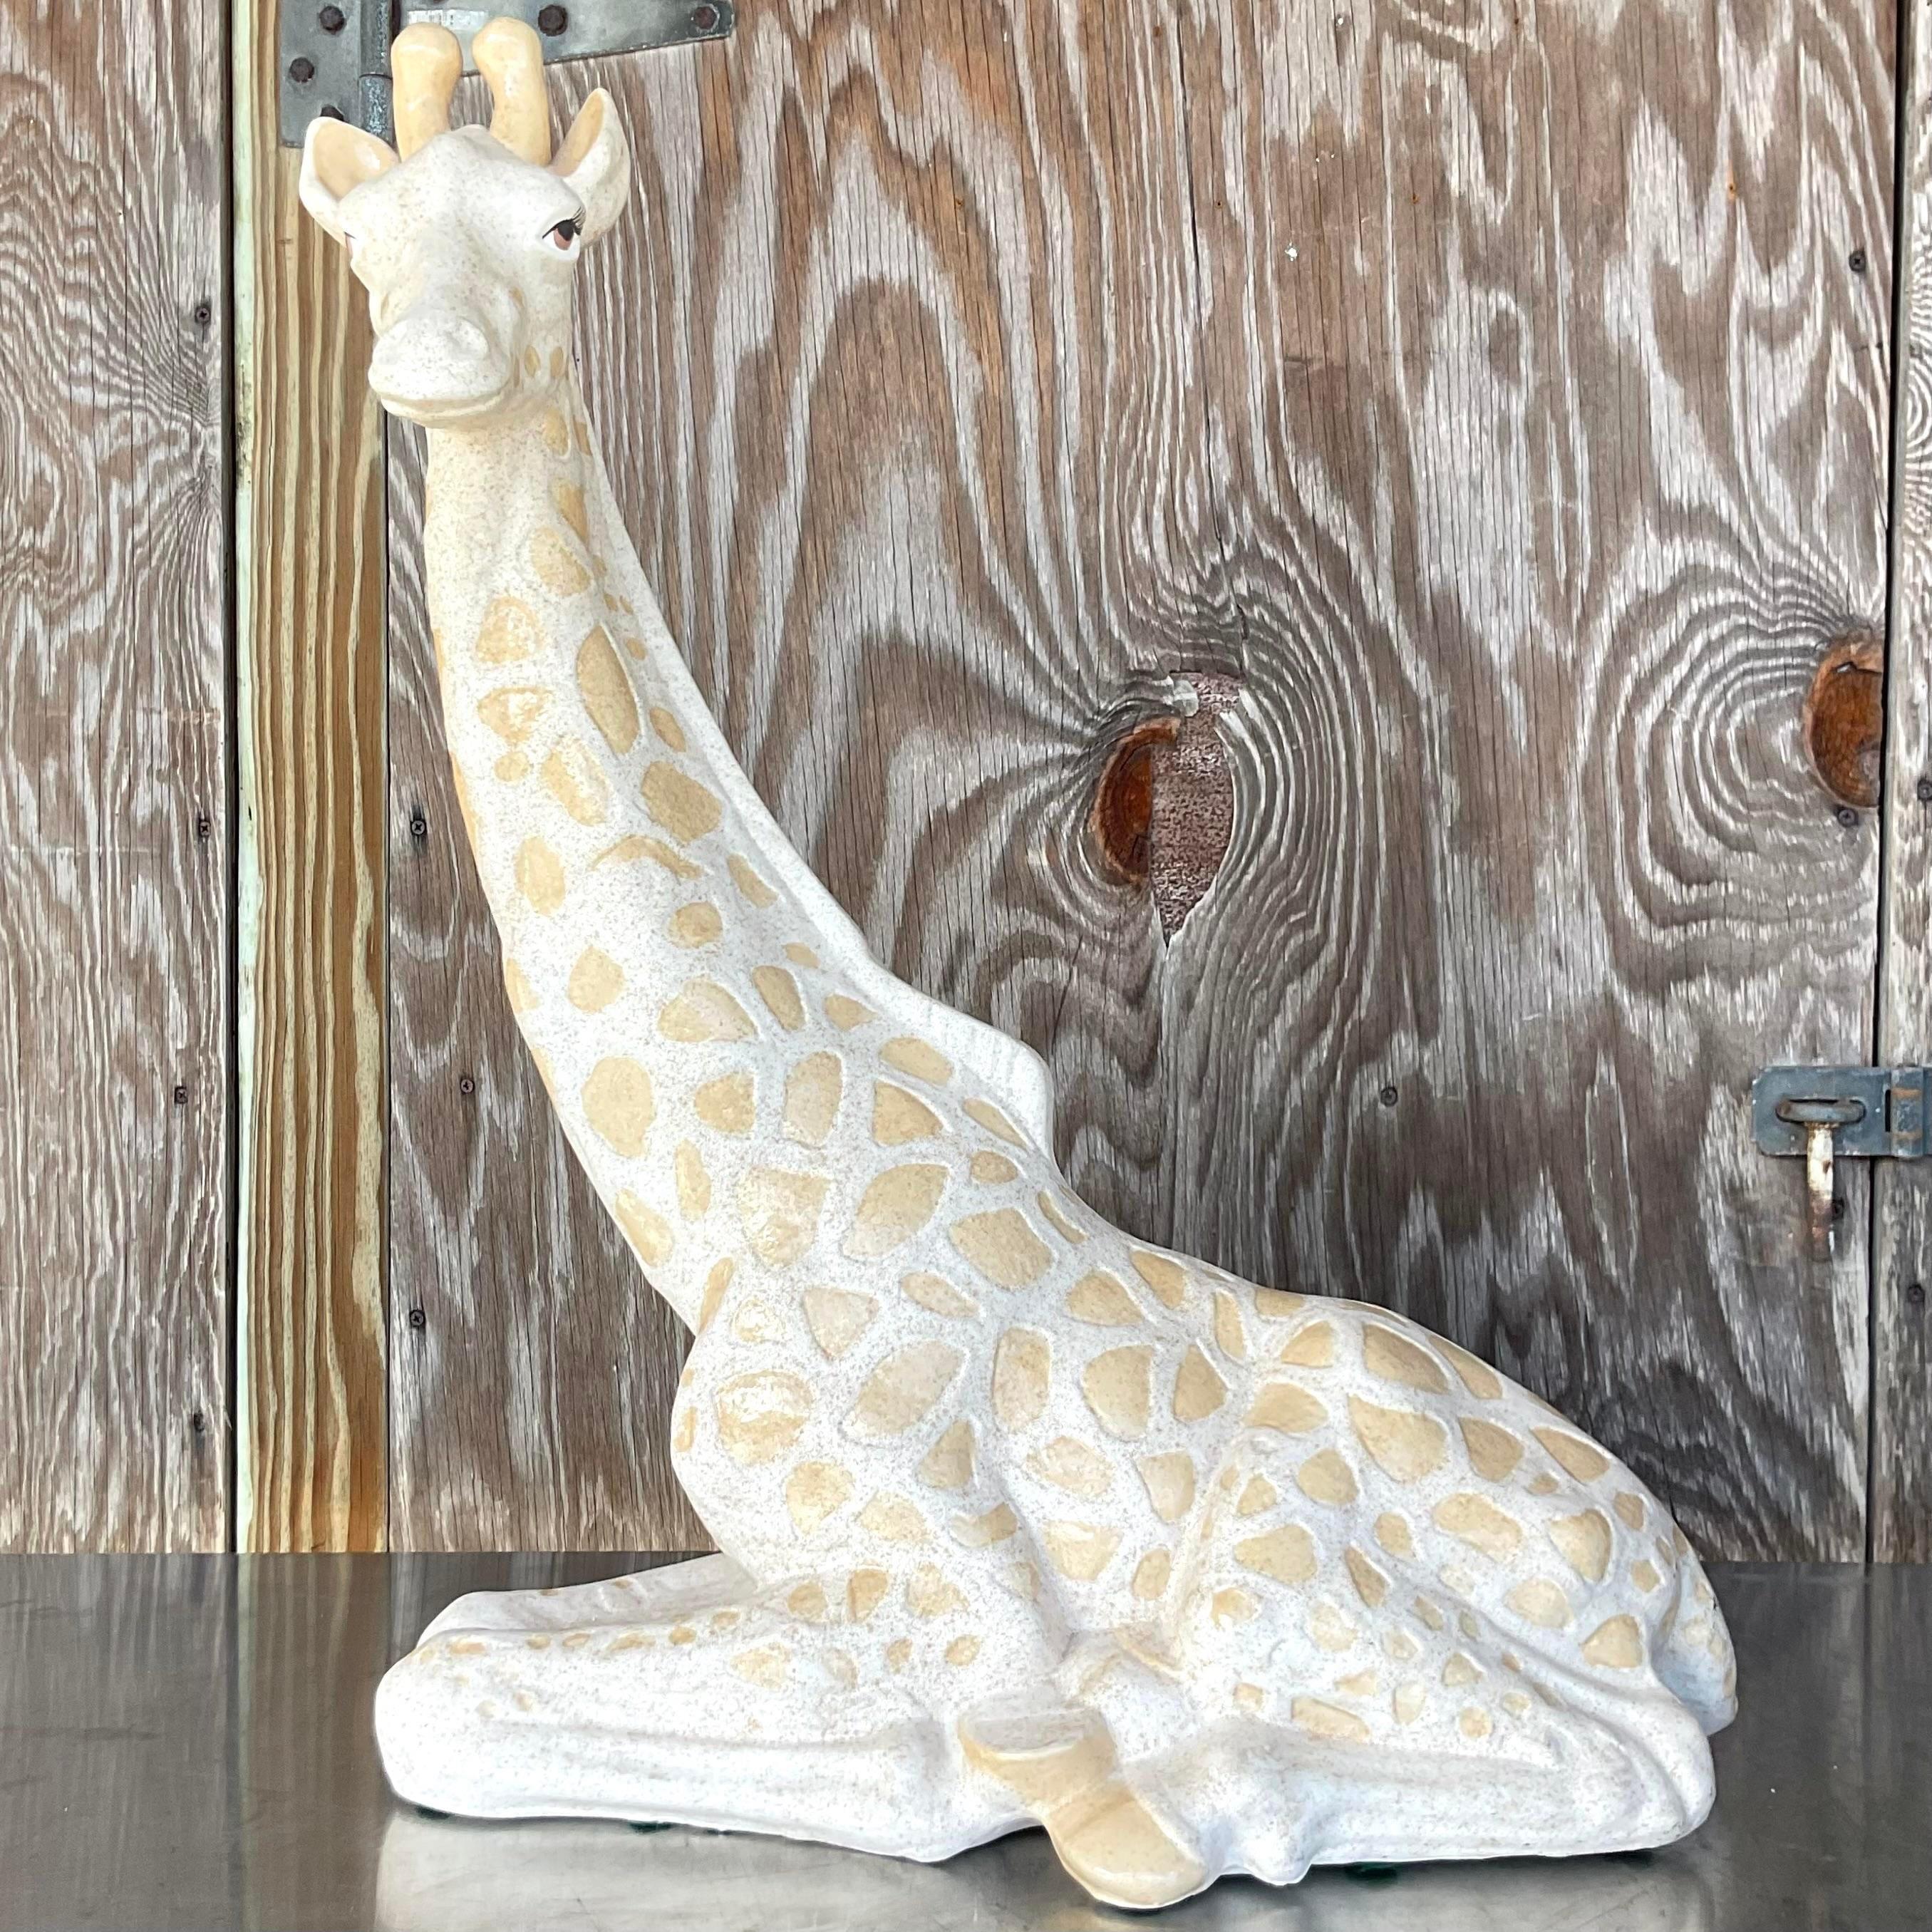 Fabulous vintage Boho Giraffe. A charming ceramic body with both matte and gloss finish. Hand painted eyes. Acquired from a Palm Beach estate.